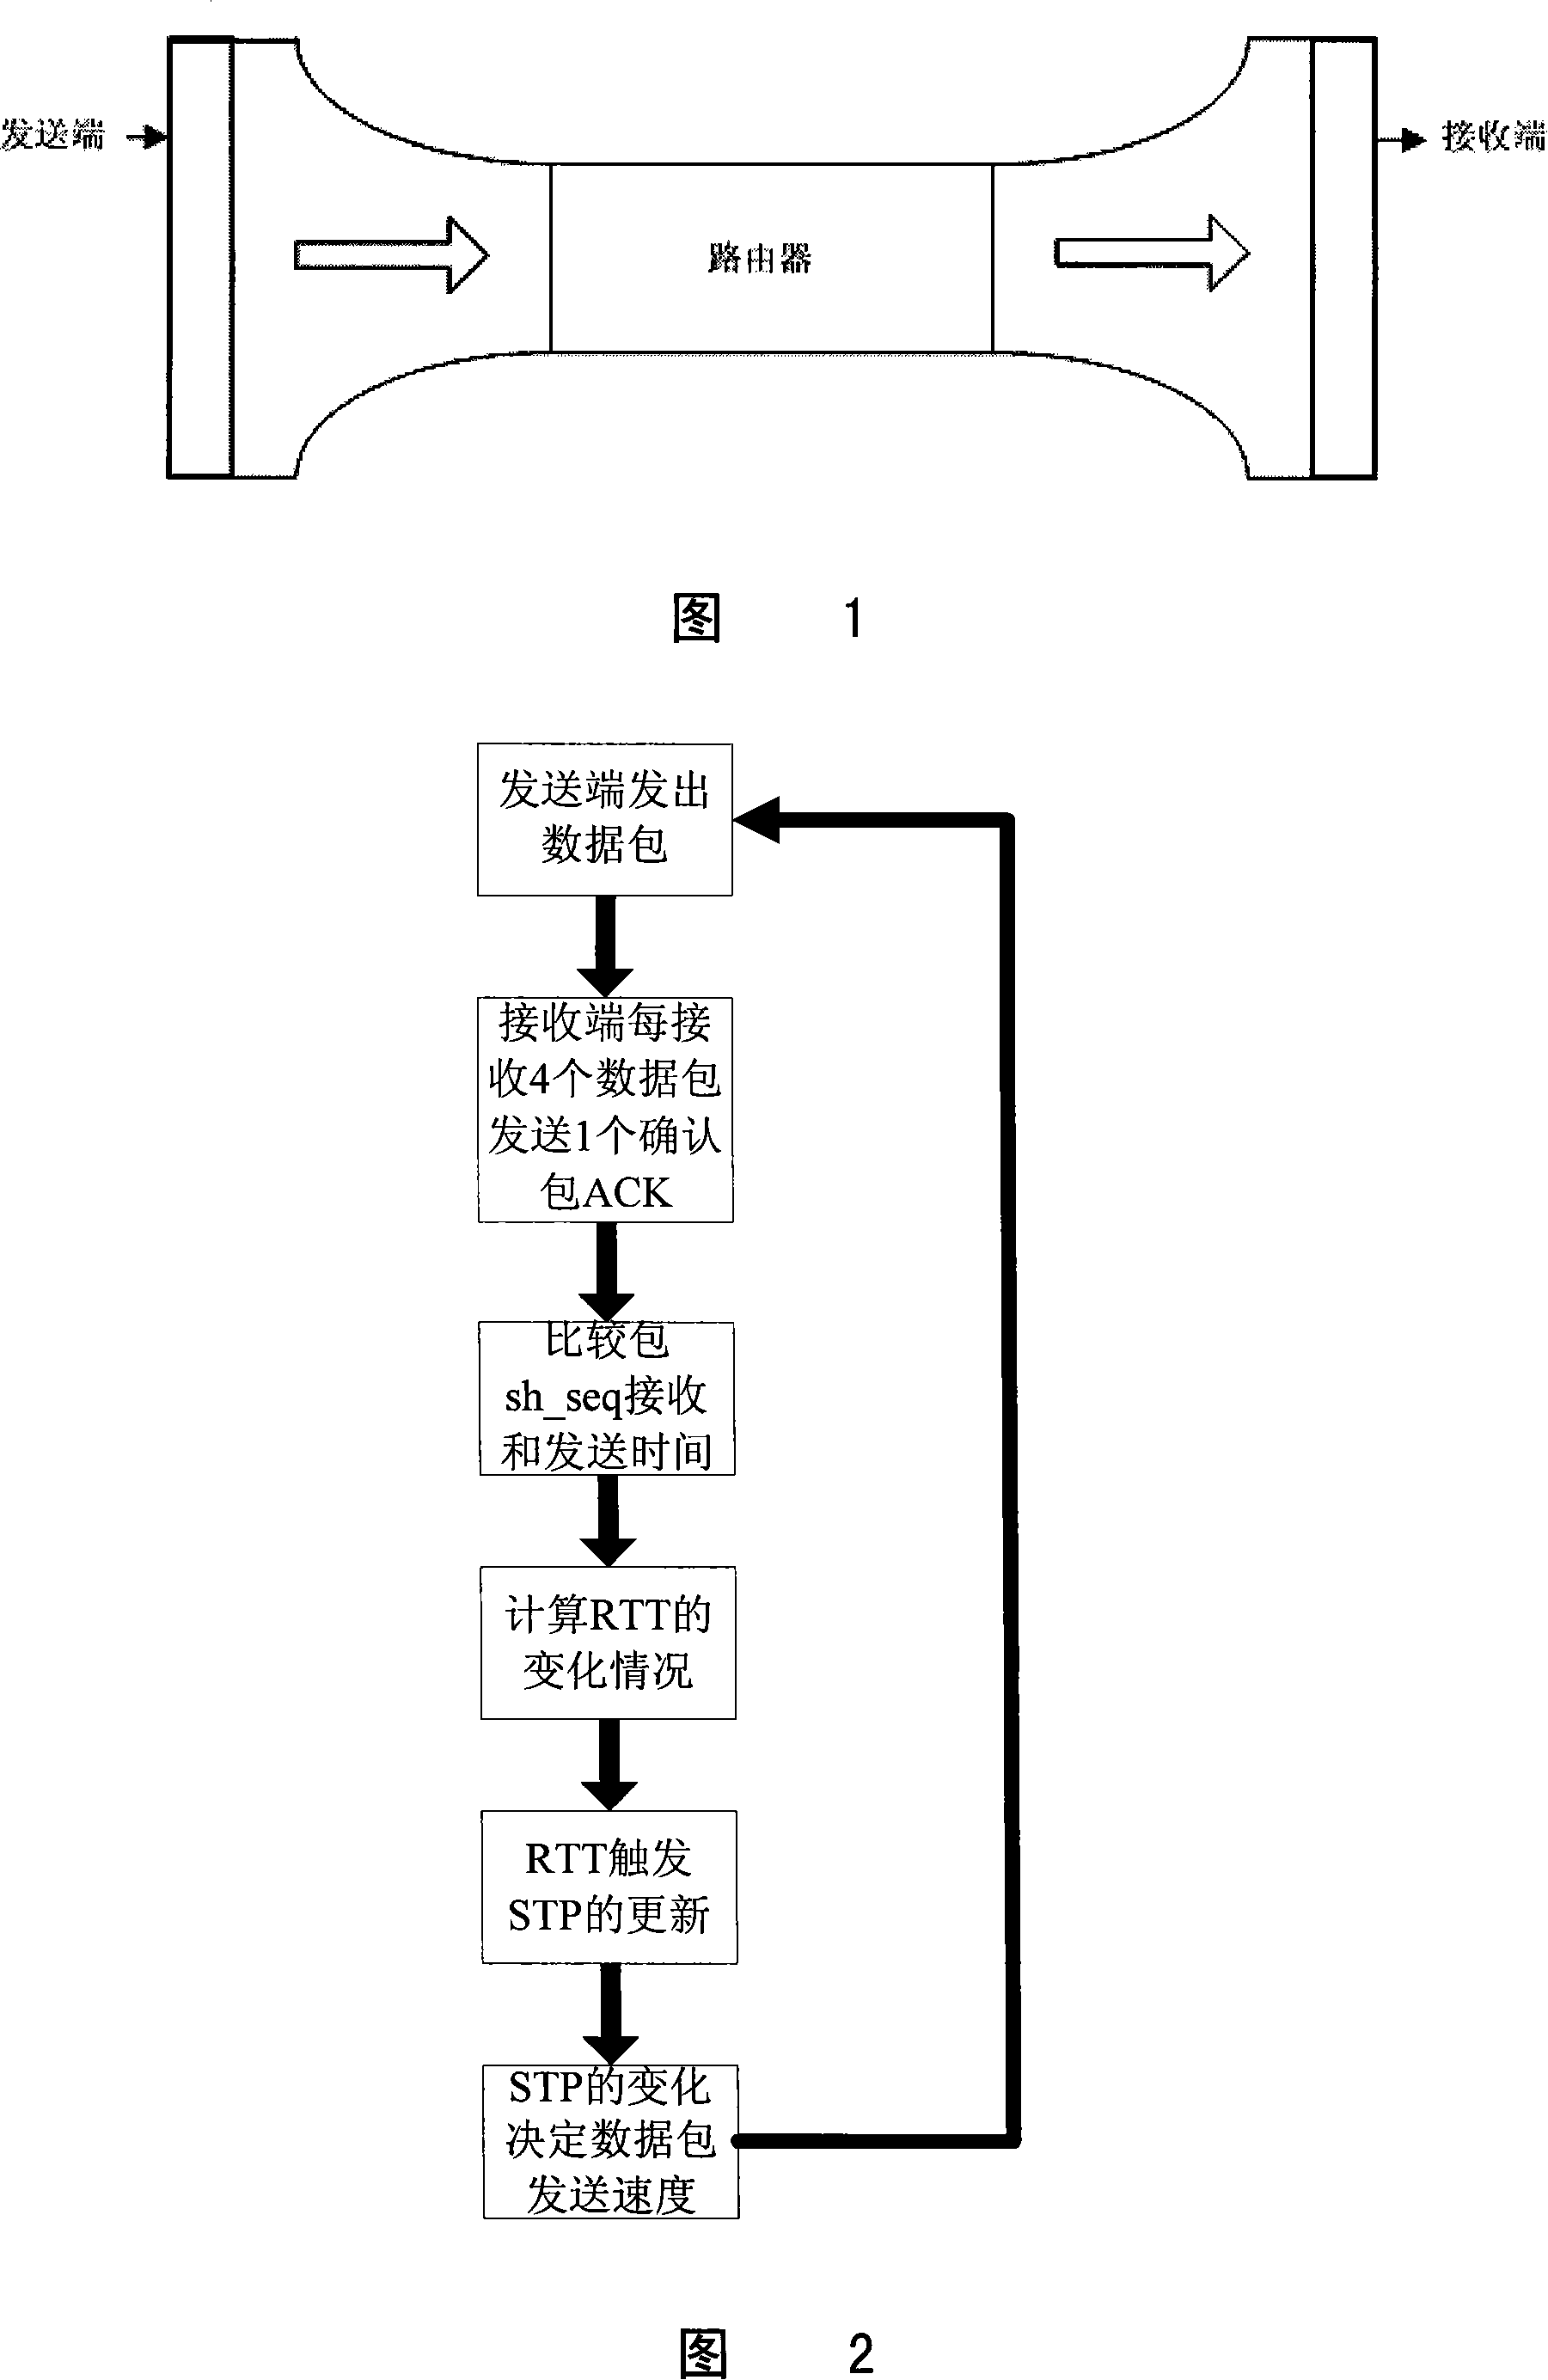 Congestion control method of implementing reliable UDP transmission